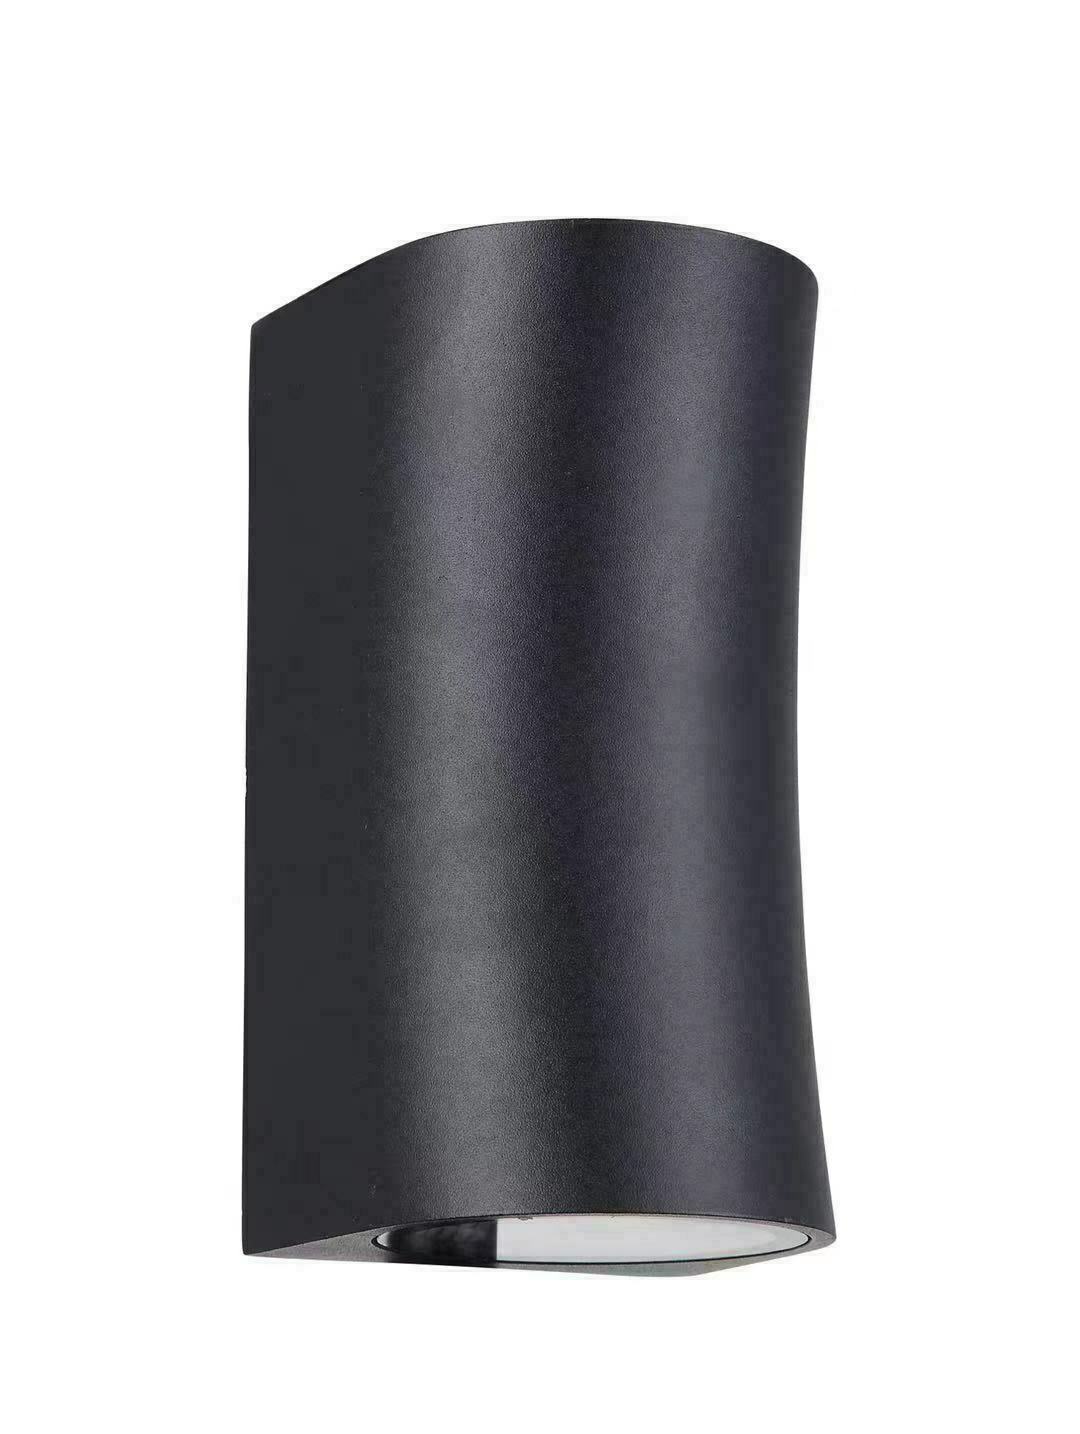 Up&Down outdoor black GU10 Black Wall  Light Curved Design Square or Round IP54 UKEW